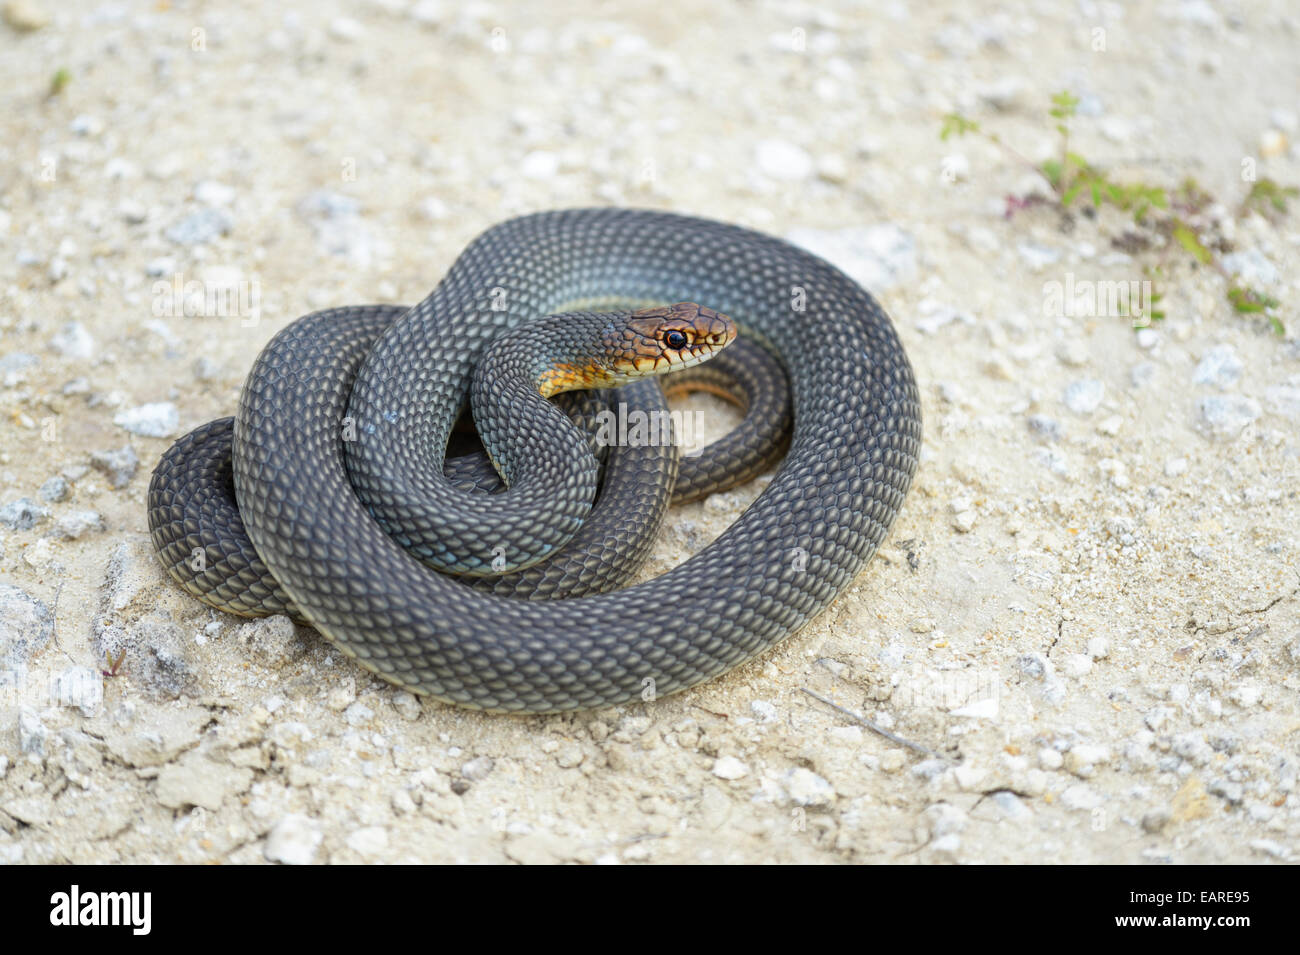 Caspian Whipsnake (Dolichophis caspius), curled up, ready to fight, Pleven region, Bulgaria Stock Photo